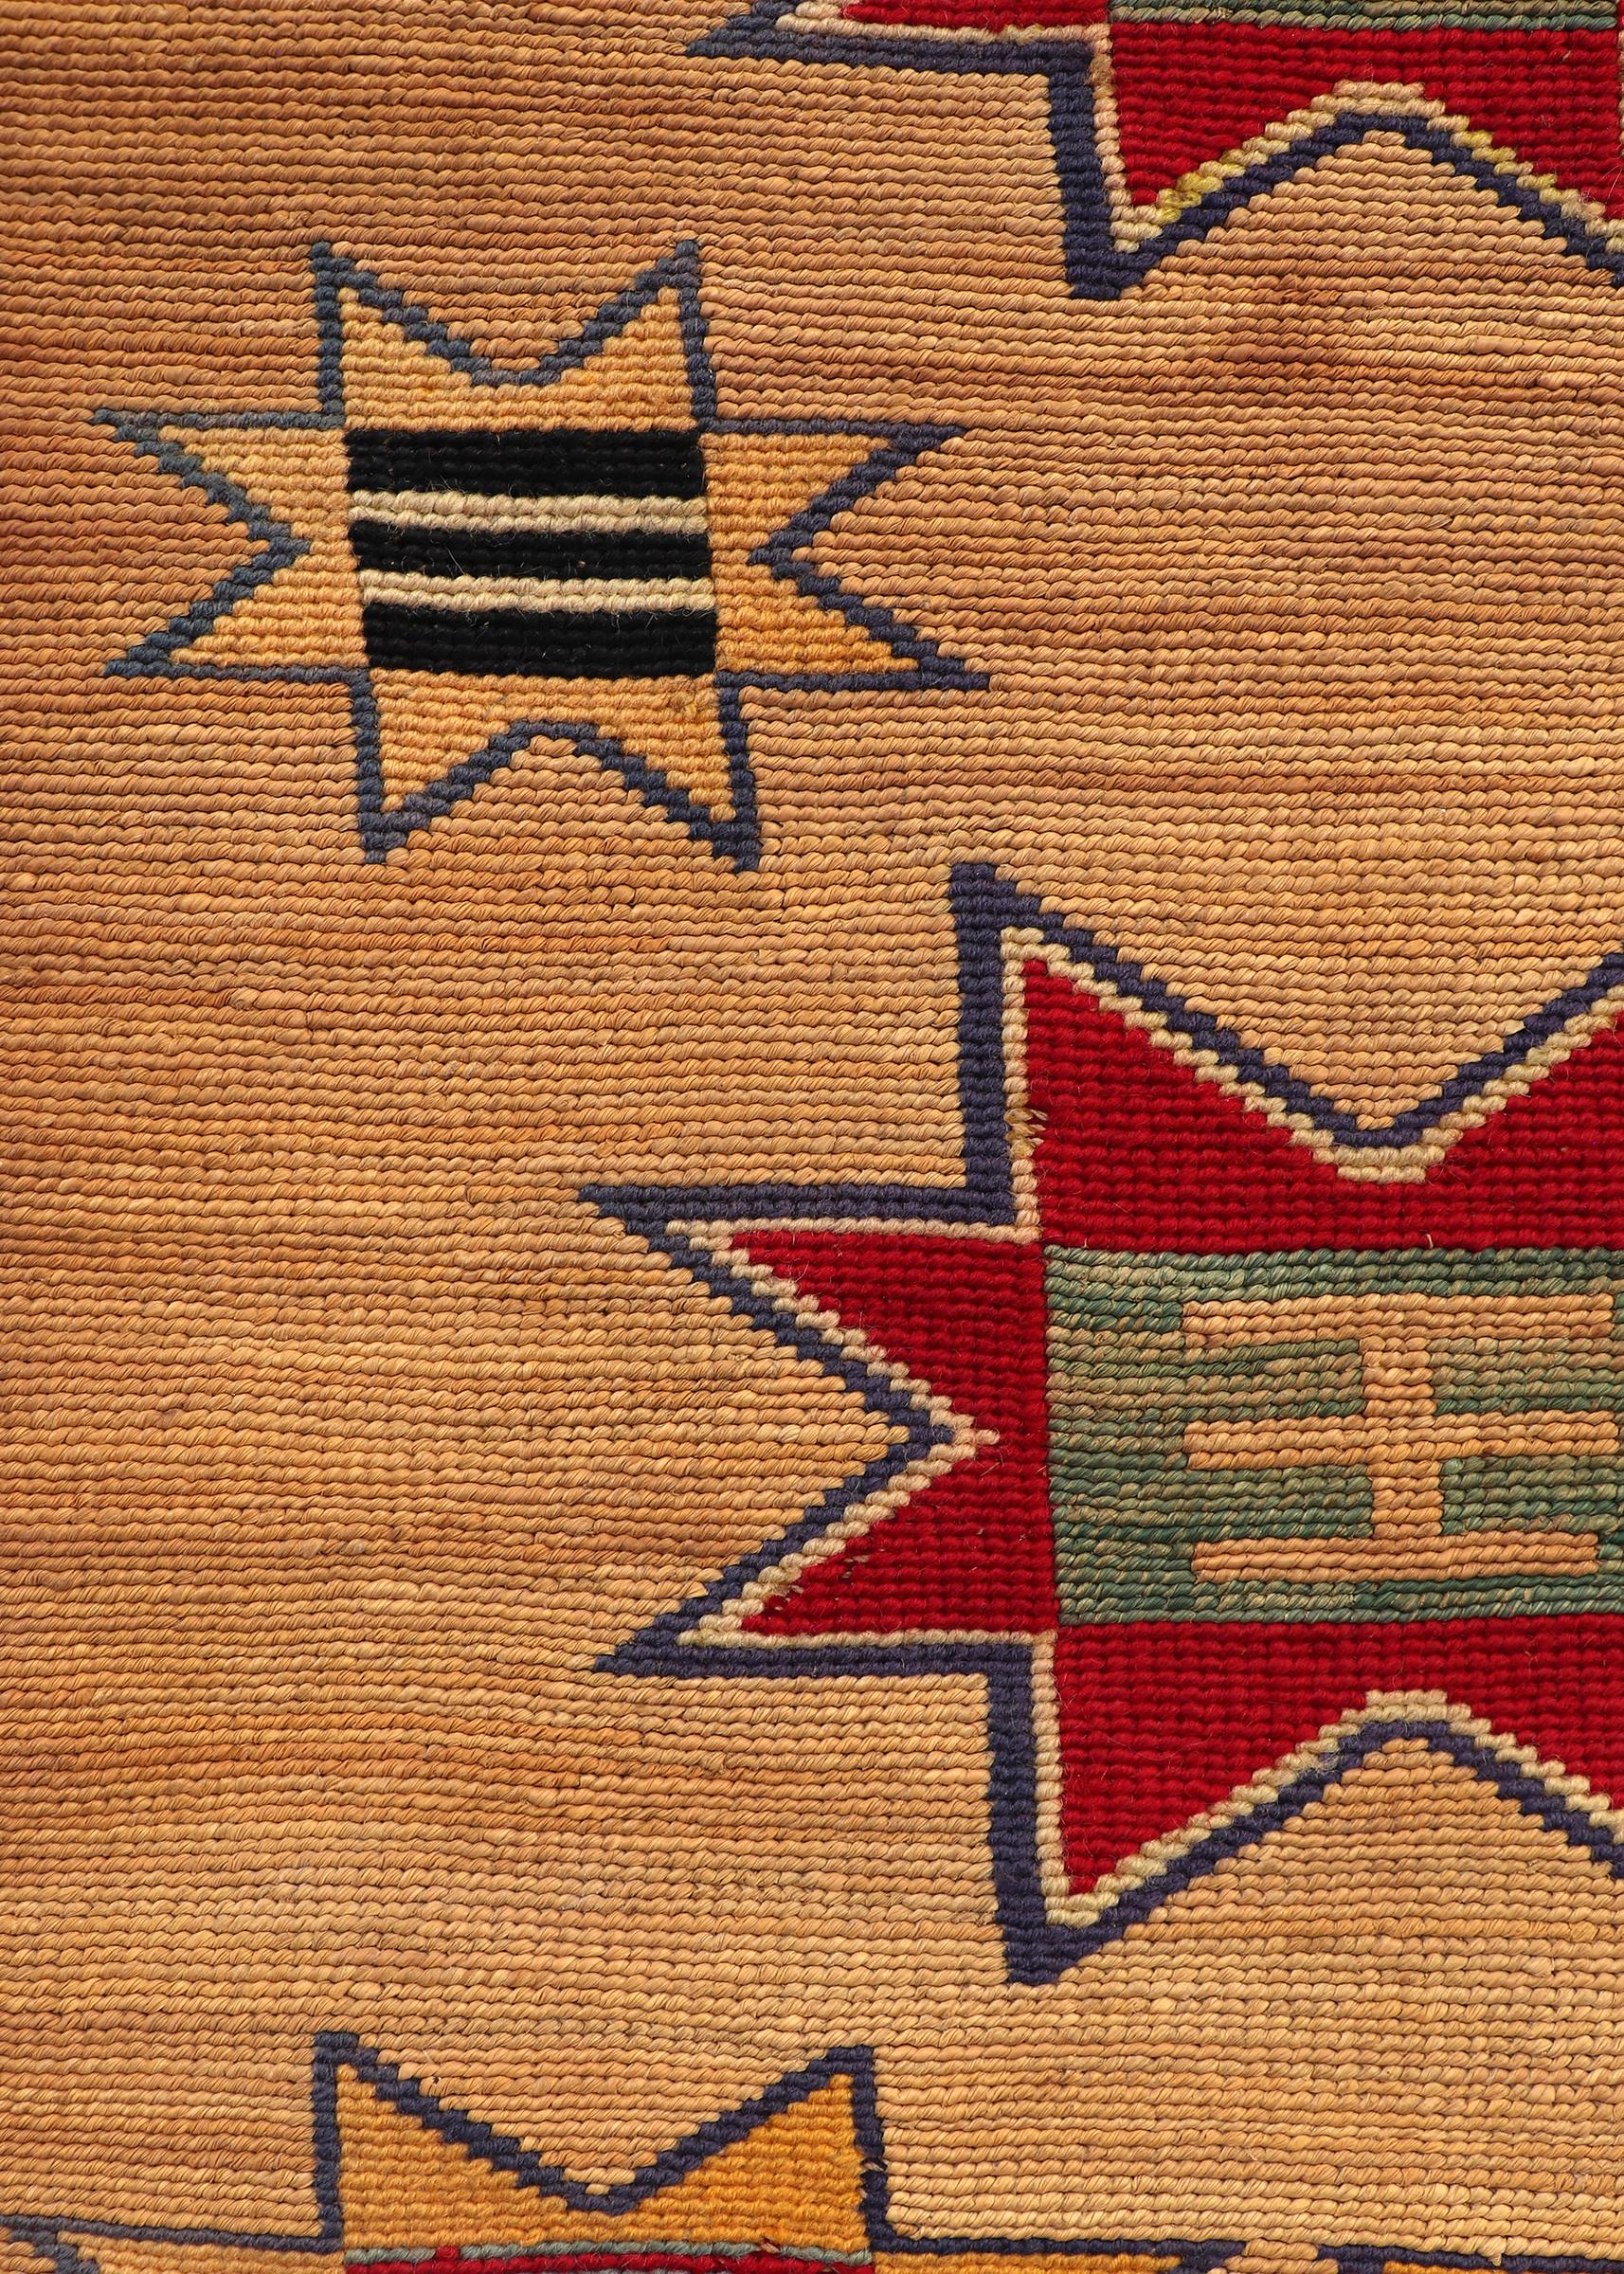 Dyed 1890s Plateau Cornhusk Bag with Blue, Red, and Yellow Geometric Designs